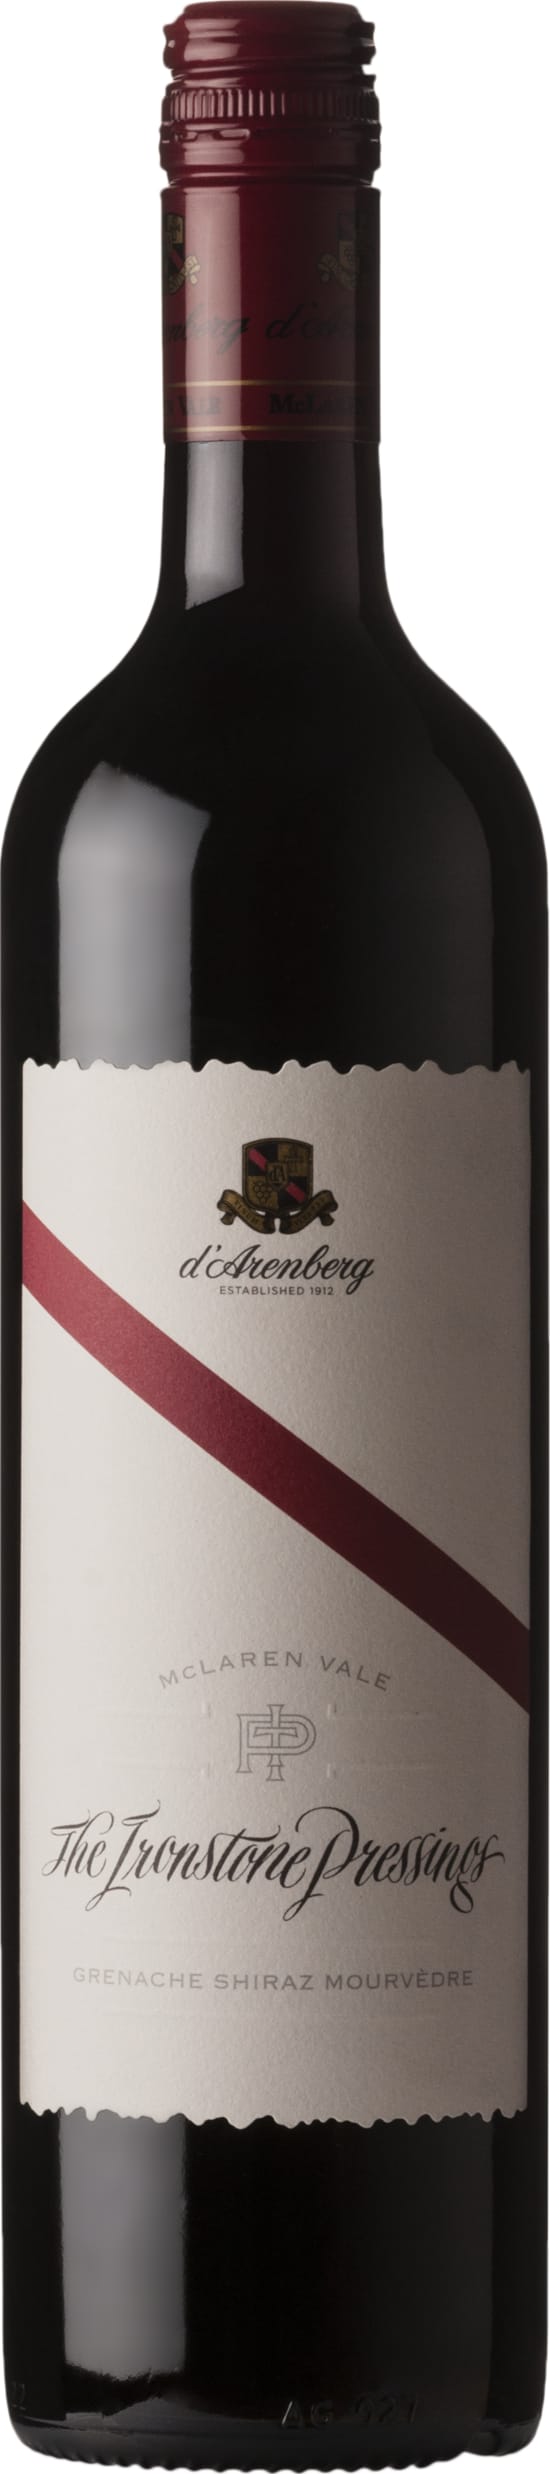 D Arenberg The Ironstone Pressings GSM 2018 75cl - Buy D Arenberg Wines from GREAT WINES DIRECT wine shop